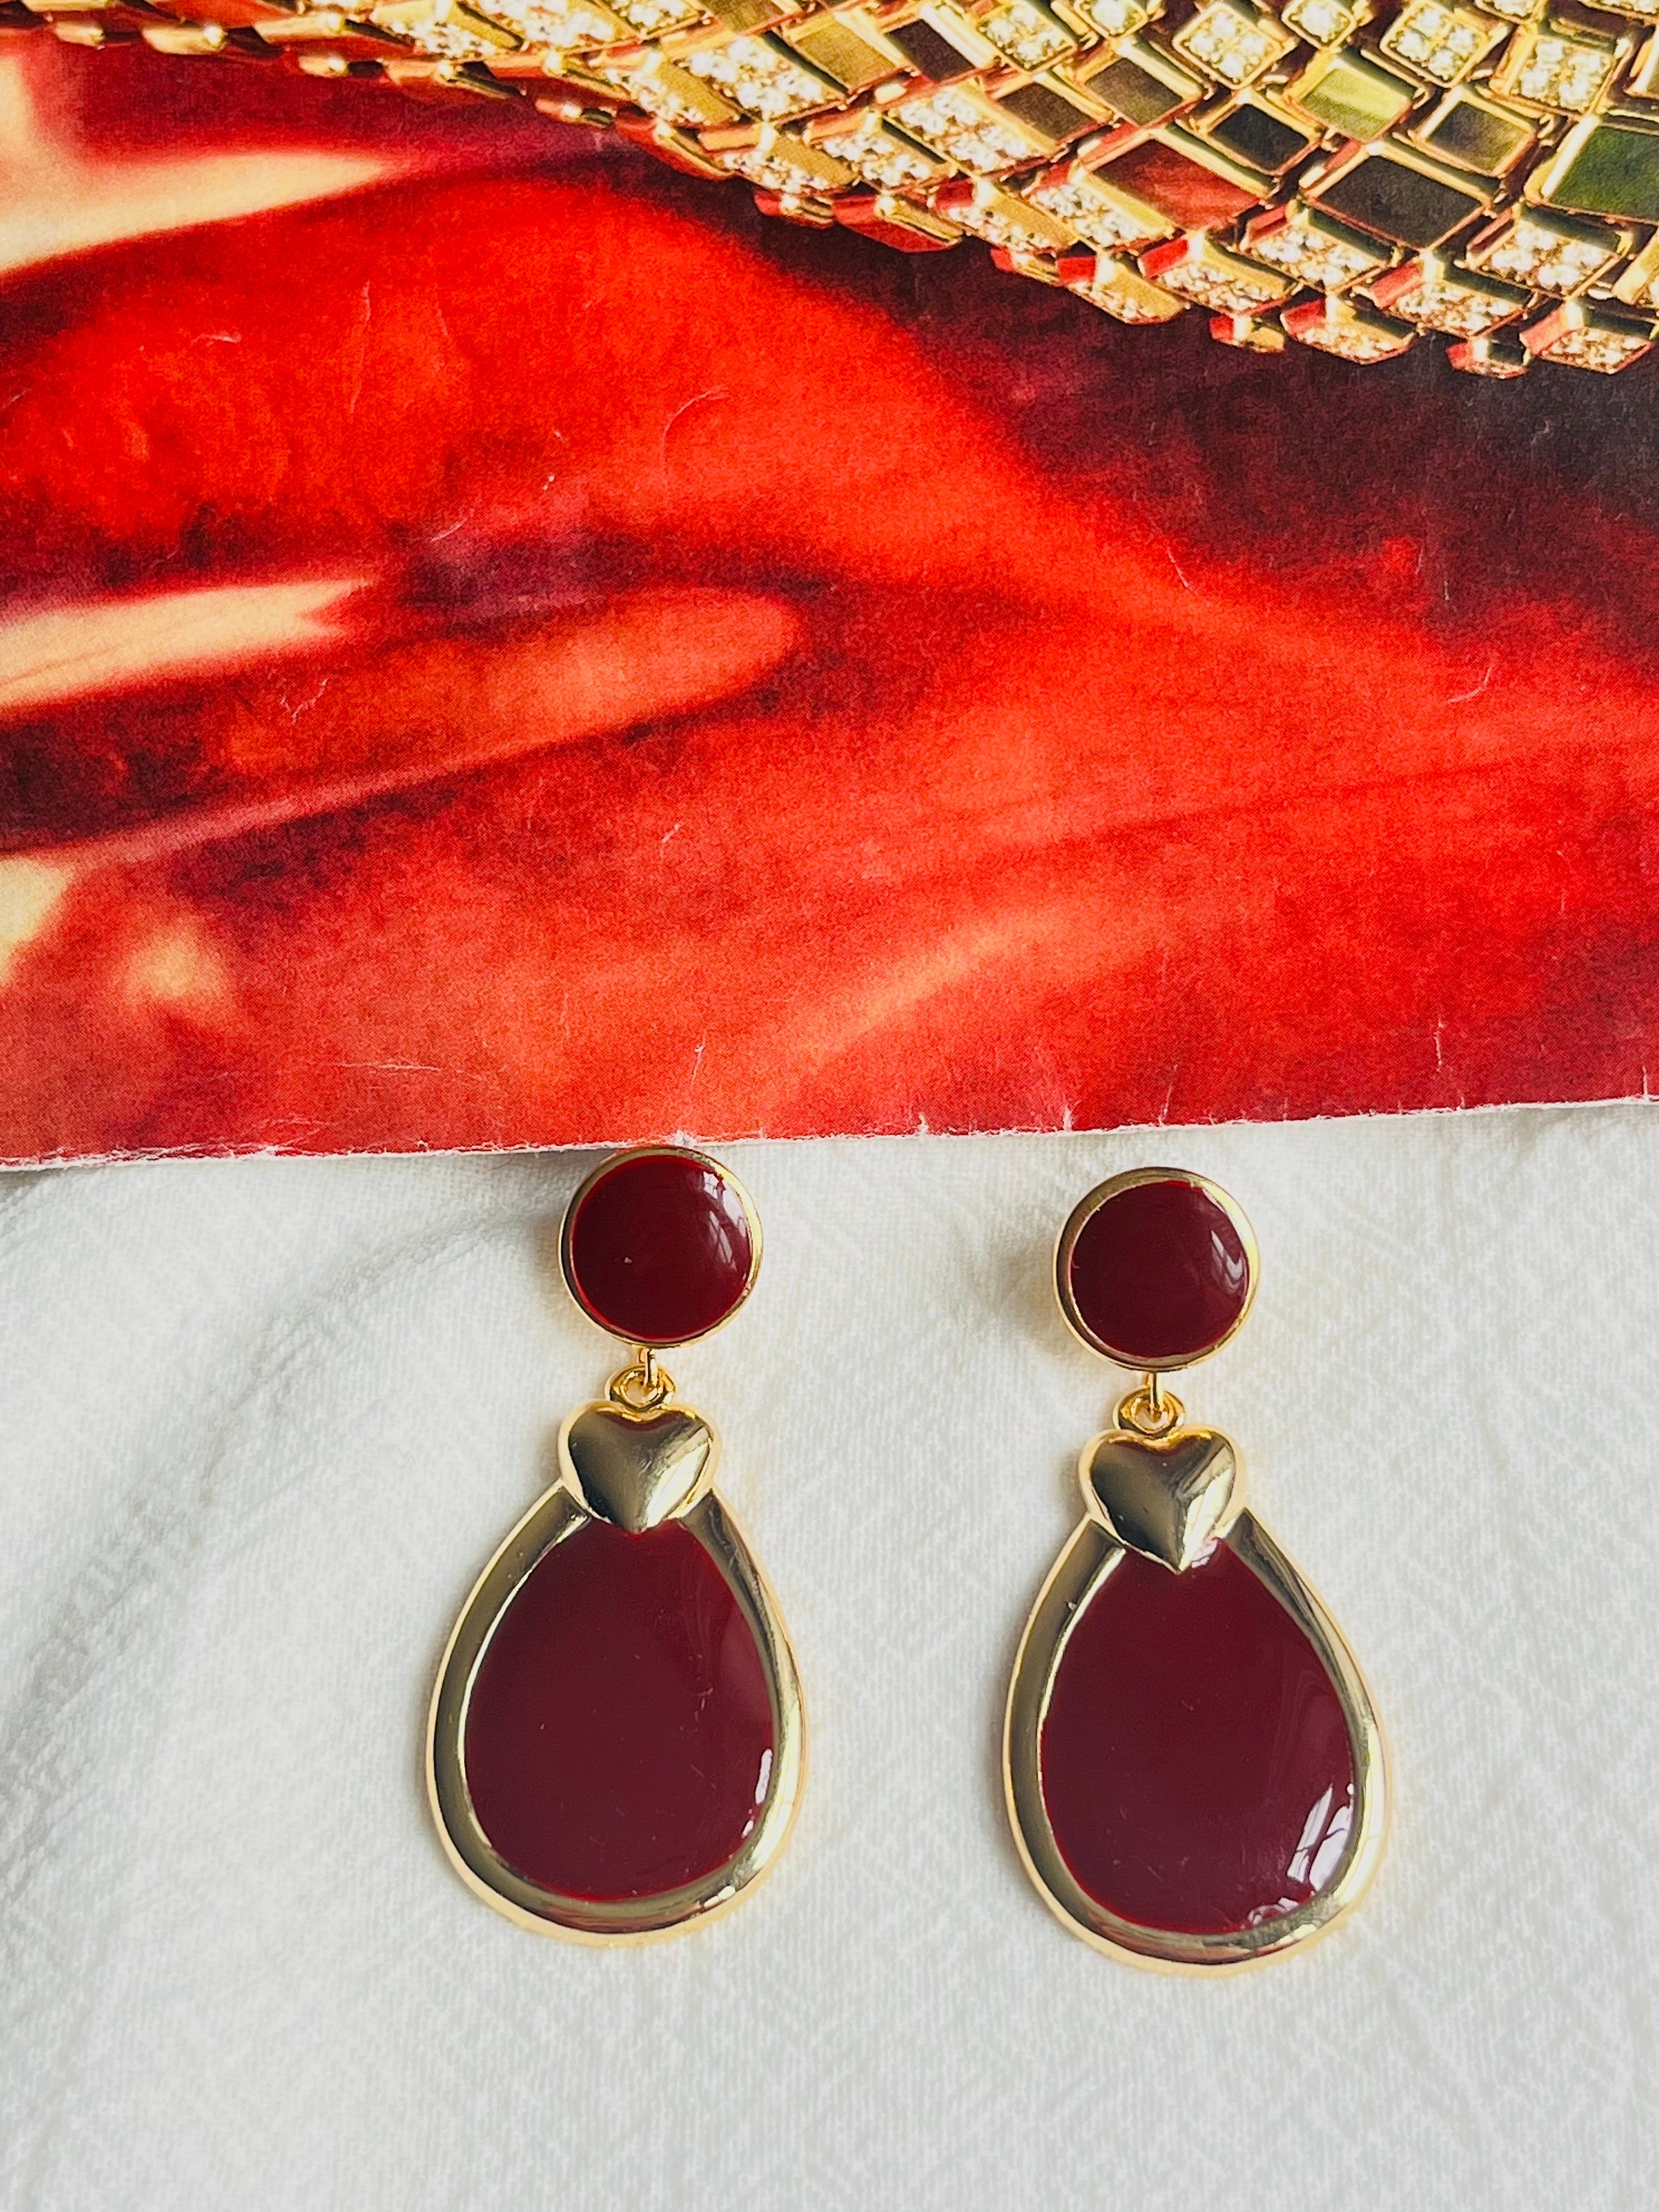 Burgundy Red Enamel Heart Love Elegant Modernist Water Drop Pierced Earrings, Gold Tone, Swarovski Element

The cost is very high. 100% handmade. Excellent gift for lady. Fine handcraft.

Material: Gold plated metal, Enamel.

Size: 5.7*2.0